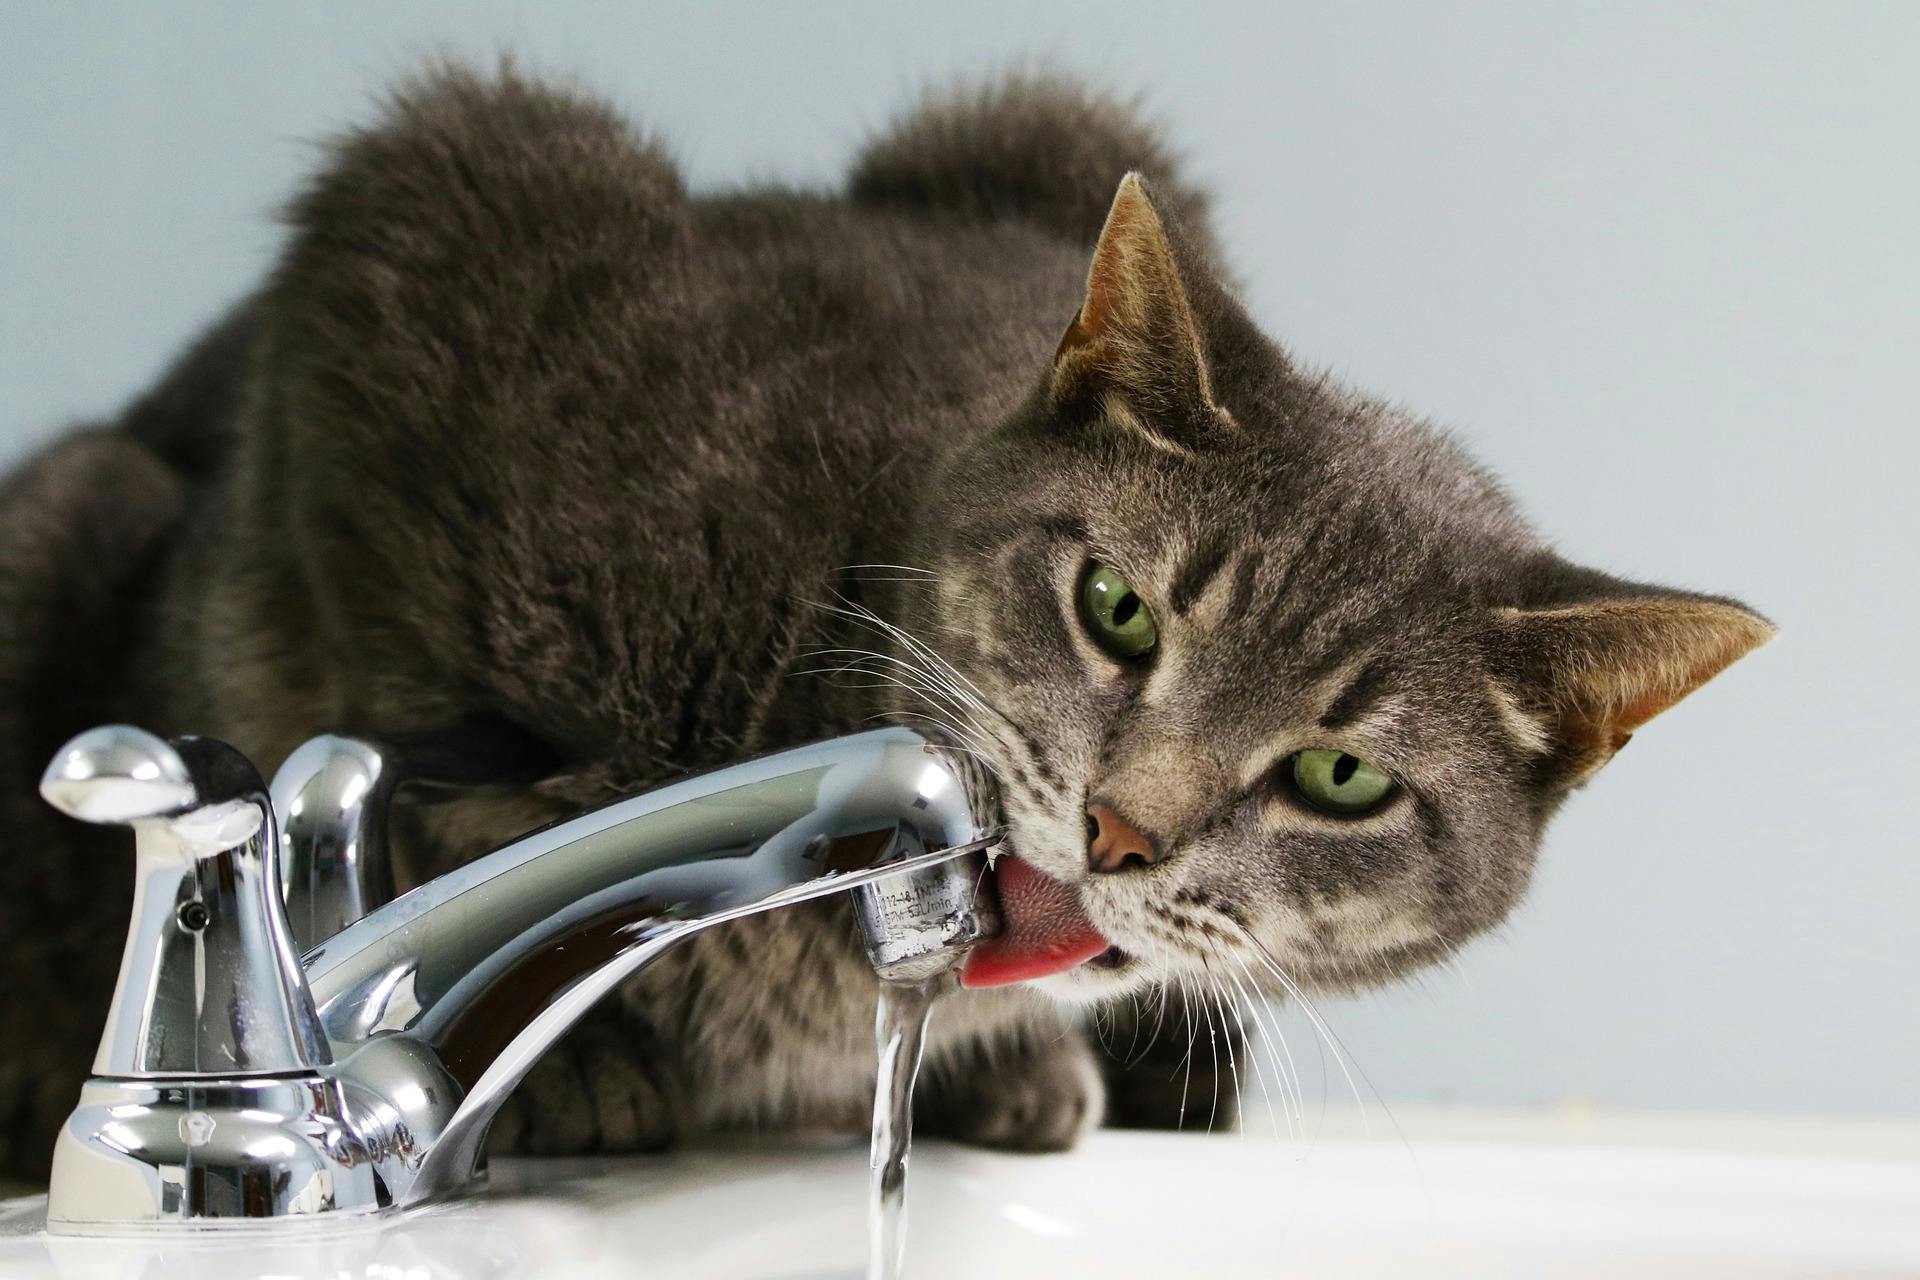 Cat drinking water from a bathroom faucet.